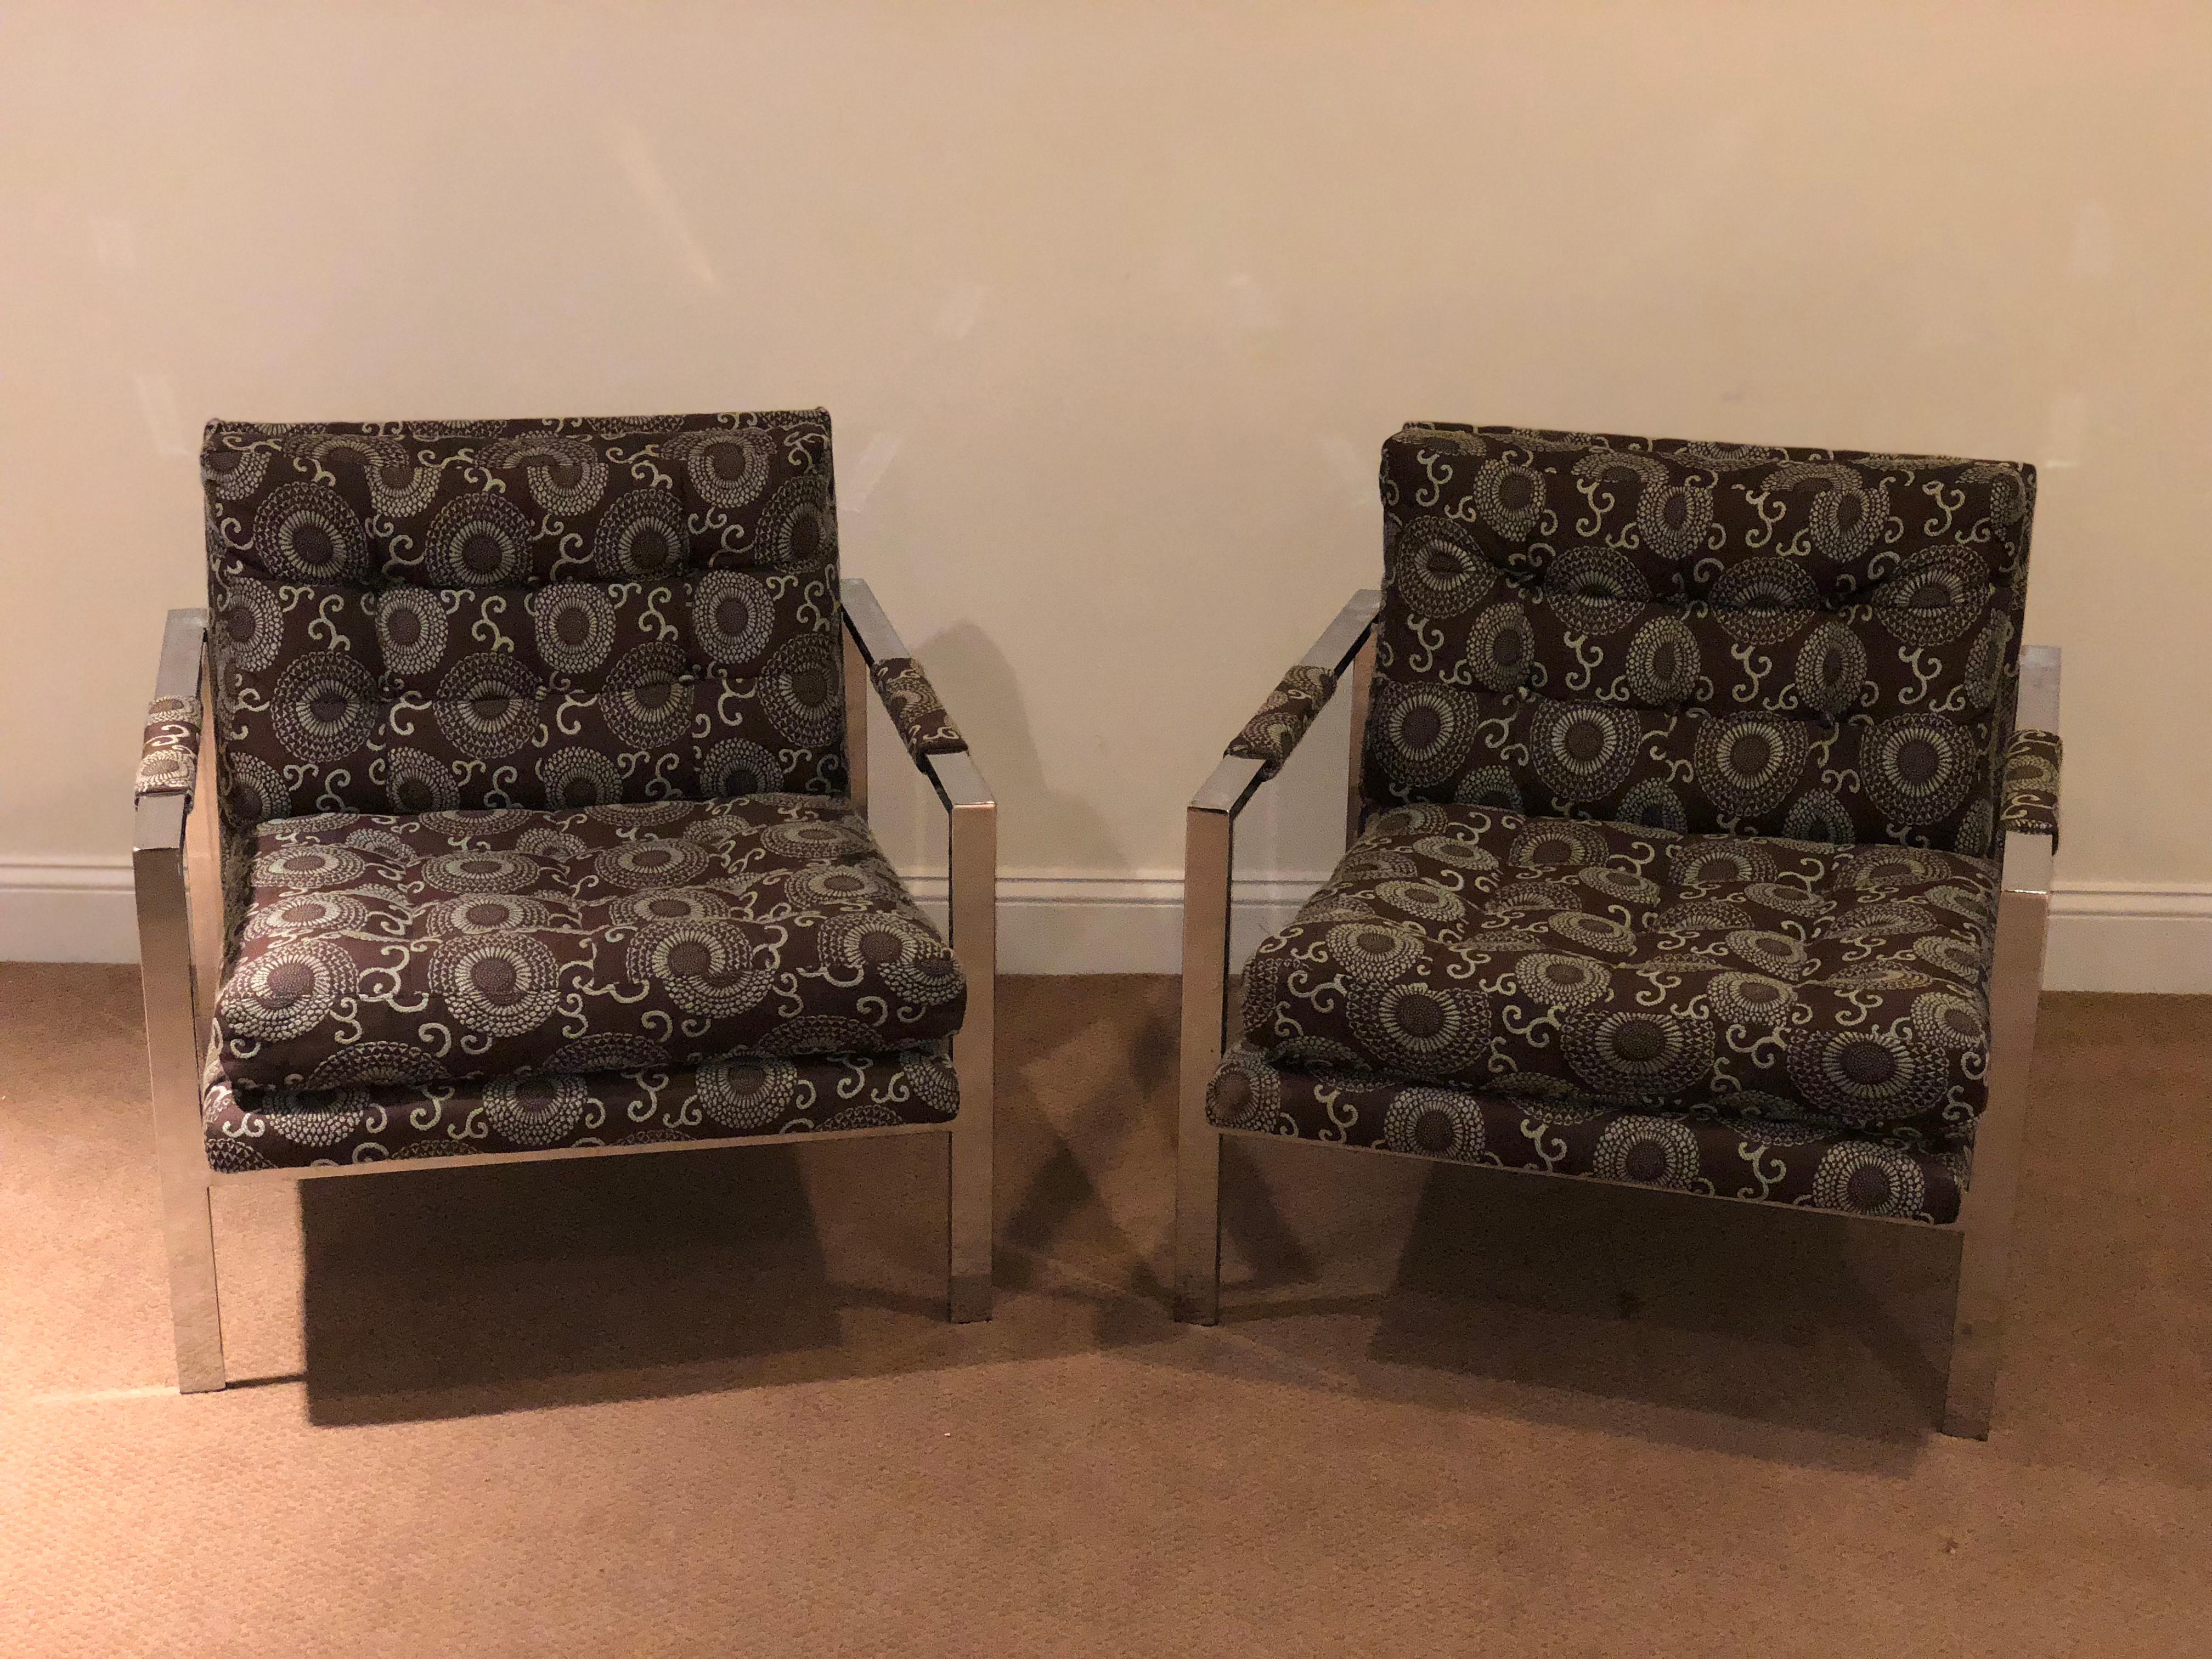 Fabulous pair of unsigned Milo Baughman for Thayer Coggin thick chrome cube lounge chairs. The upholstery is a chocolate brown with aqua blue design in good condition (some wear on the edges). The oversized thick chrome flat bars have a shiny